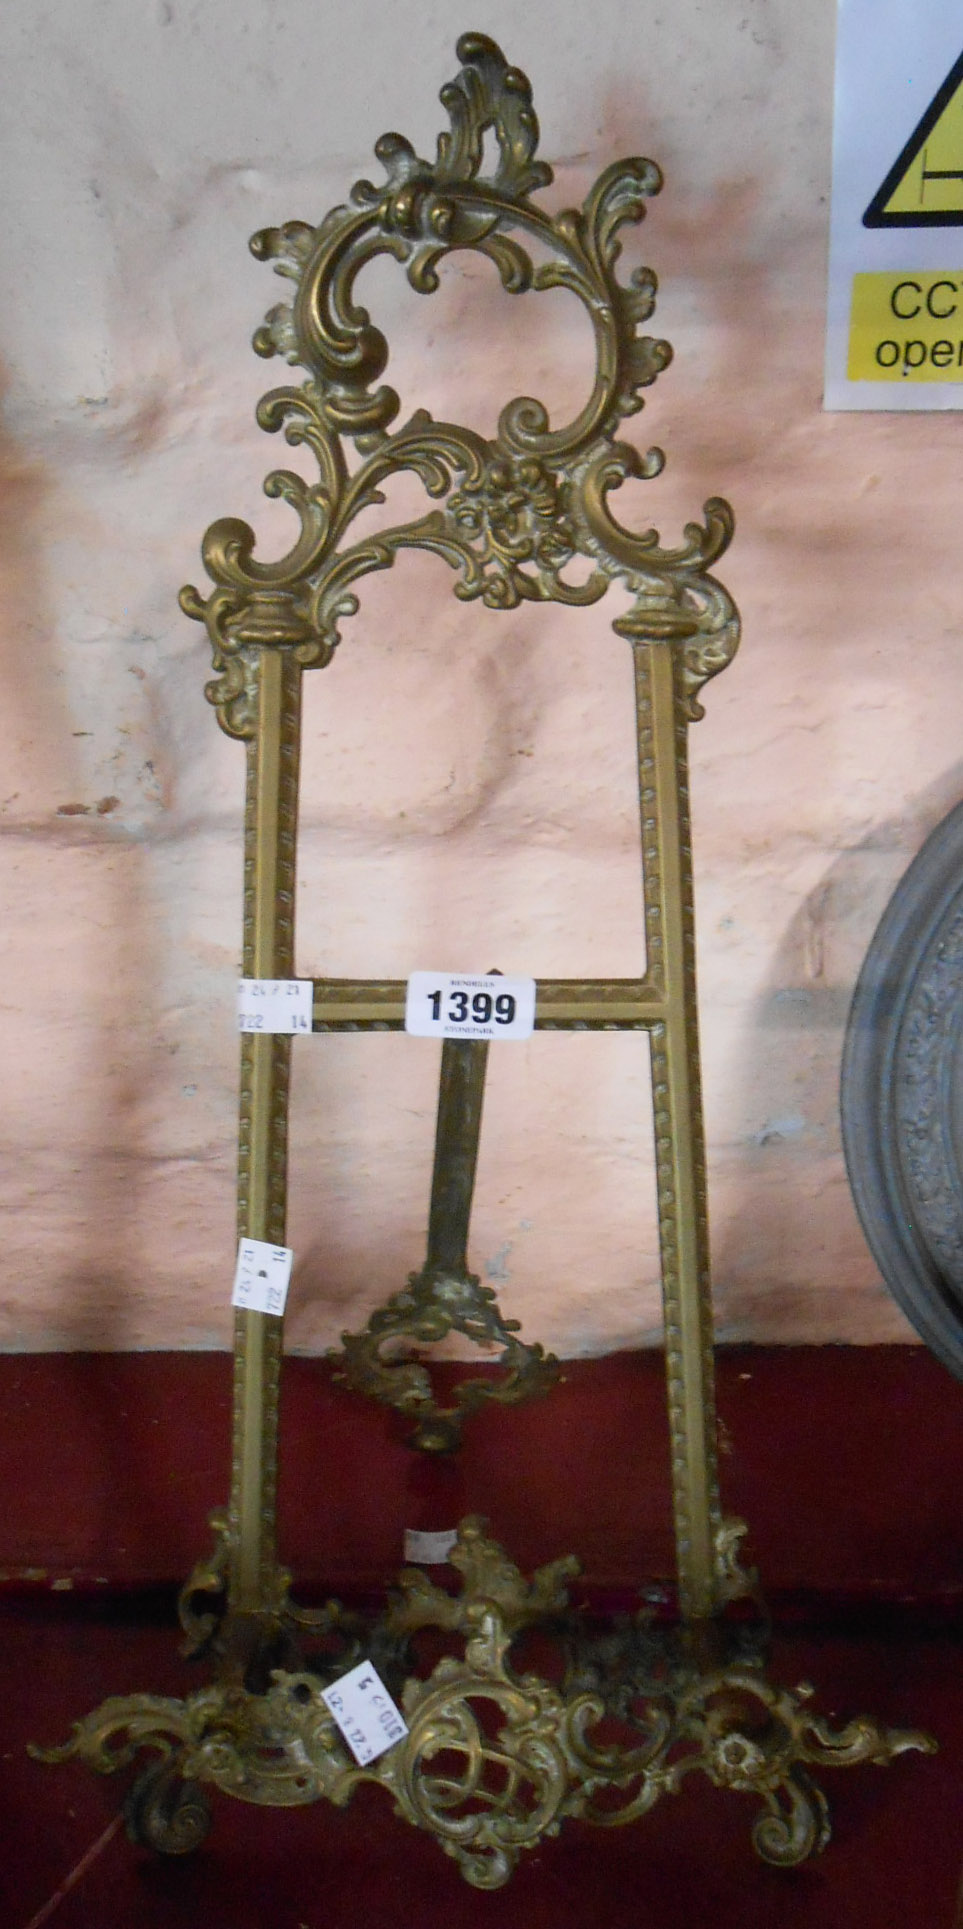 A vintage cast brass table easel with decorative Rococo styling